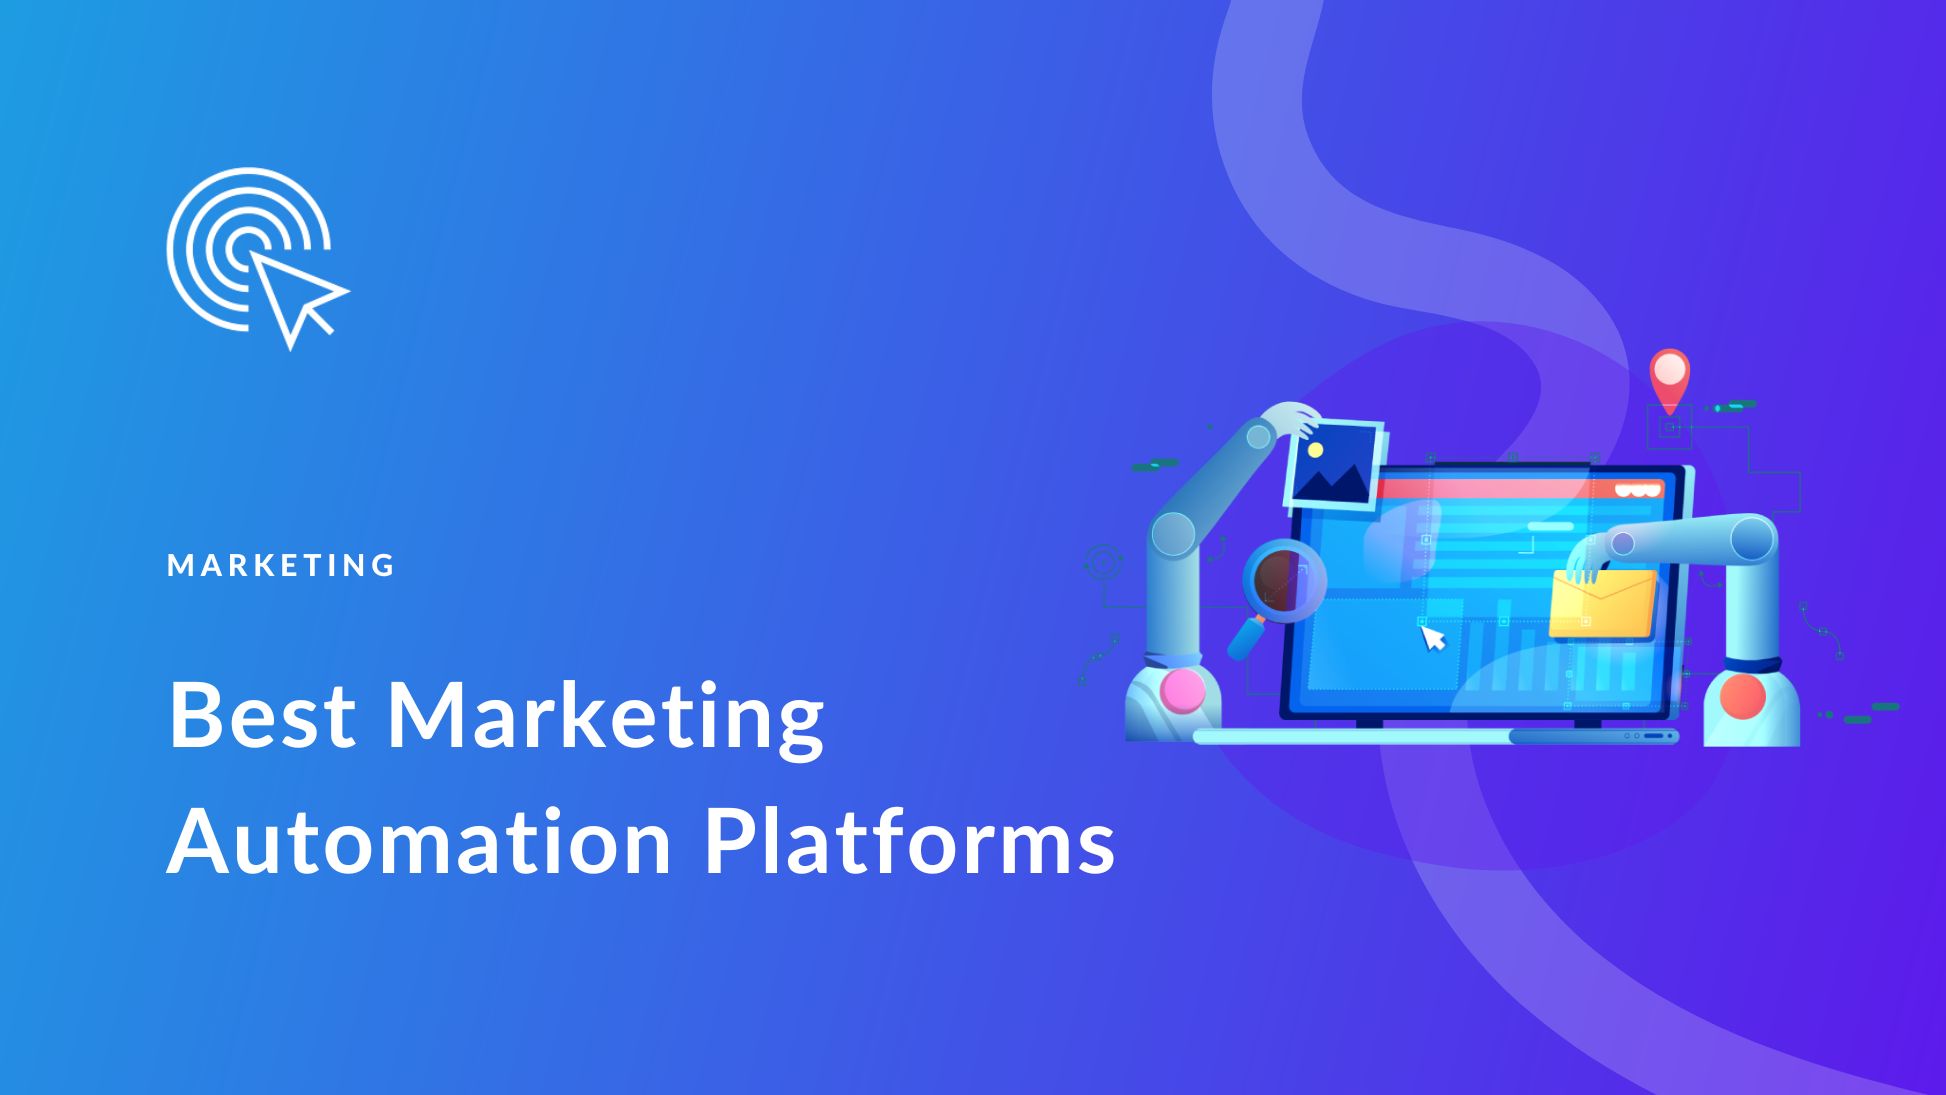 5 Best Marketing Automation Platforms for Your Business in 2023